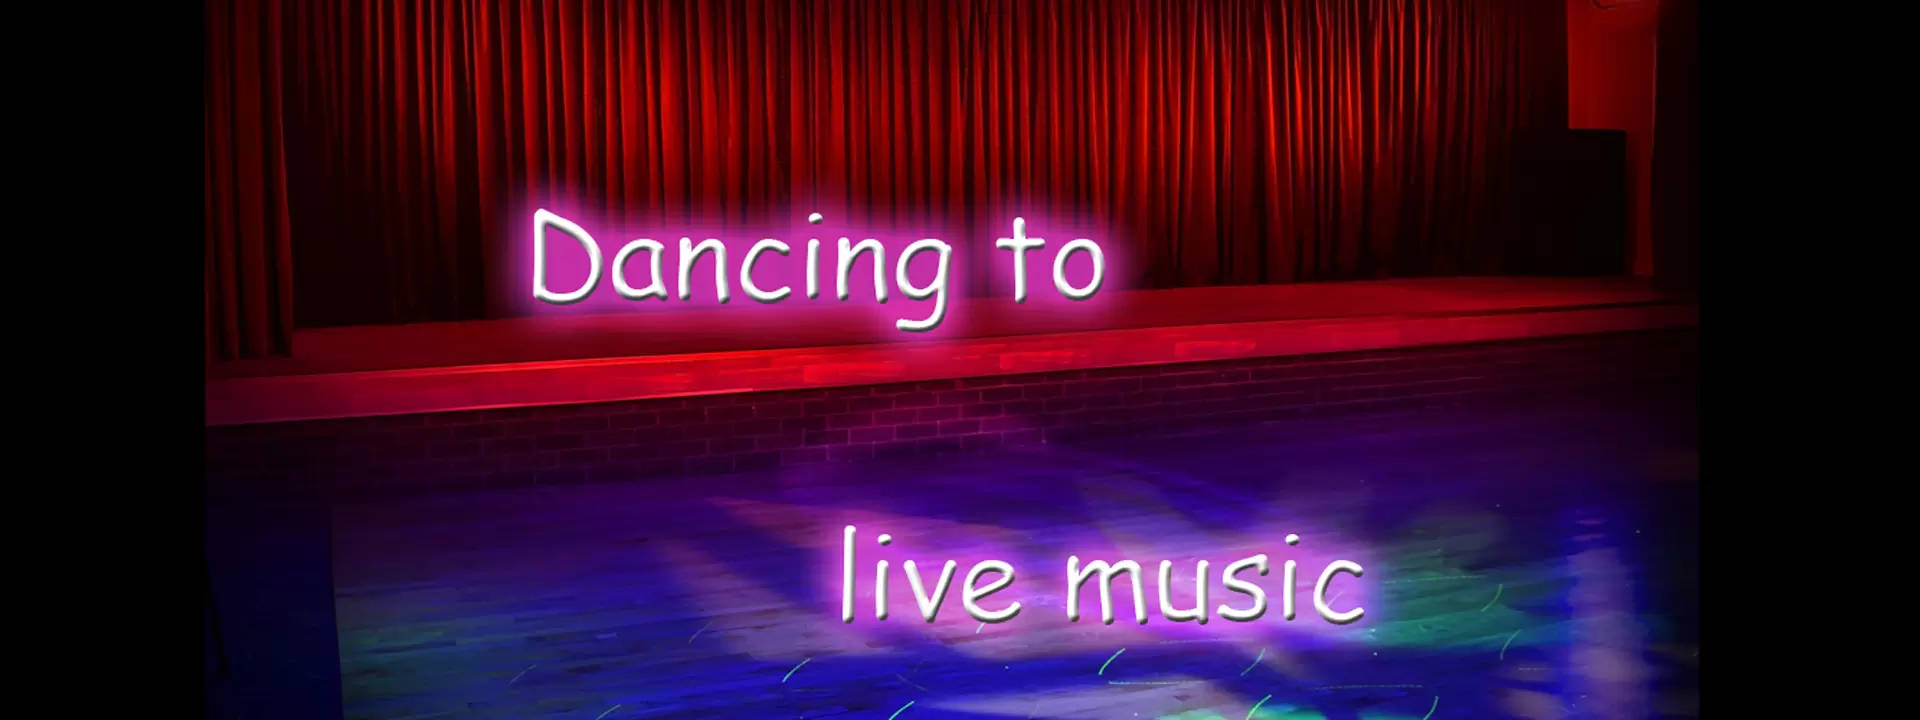 Dancing To Live Music